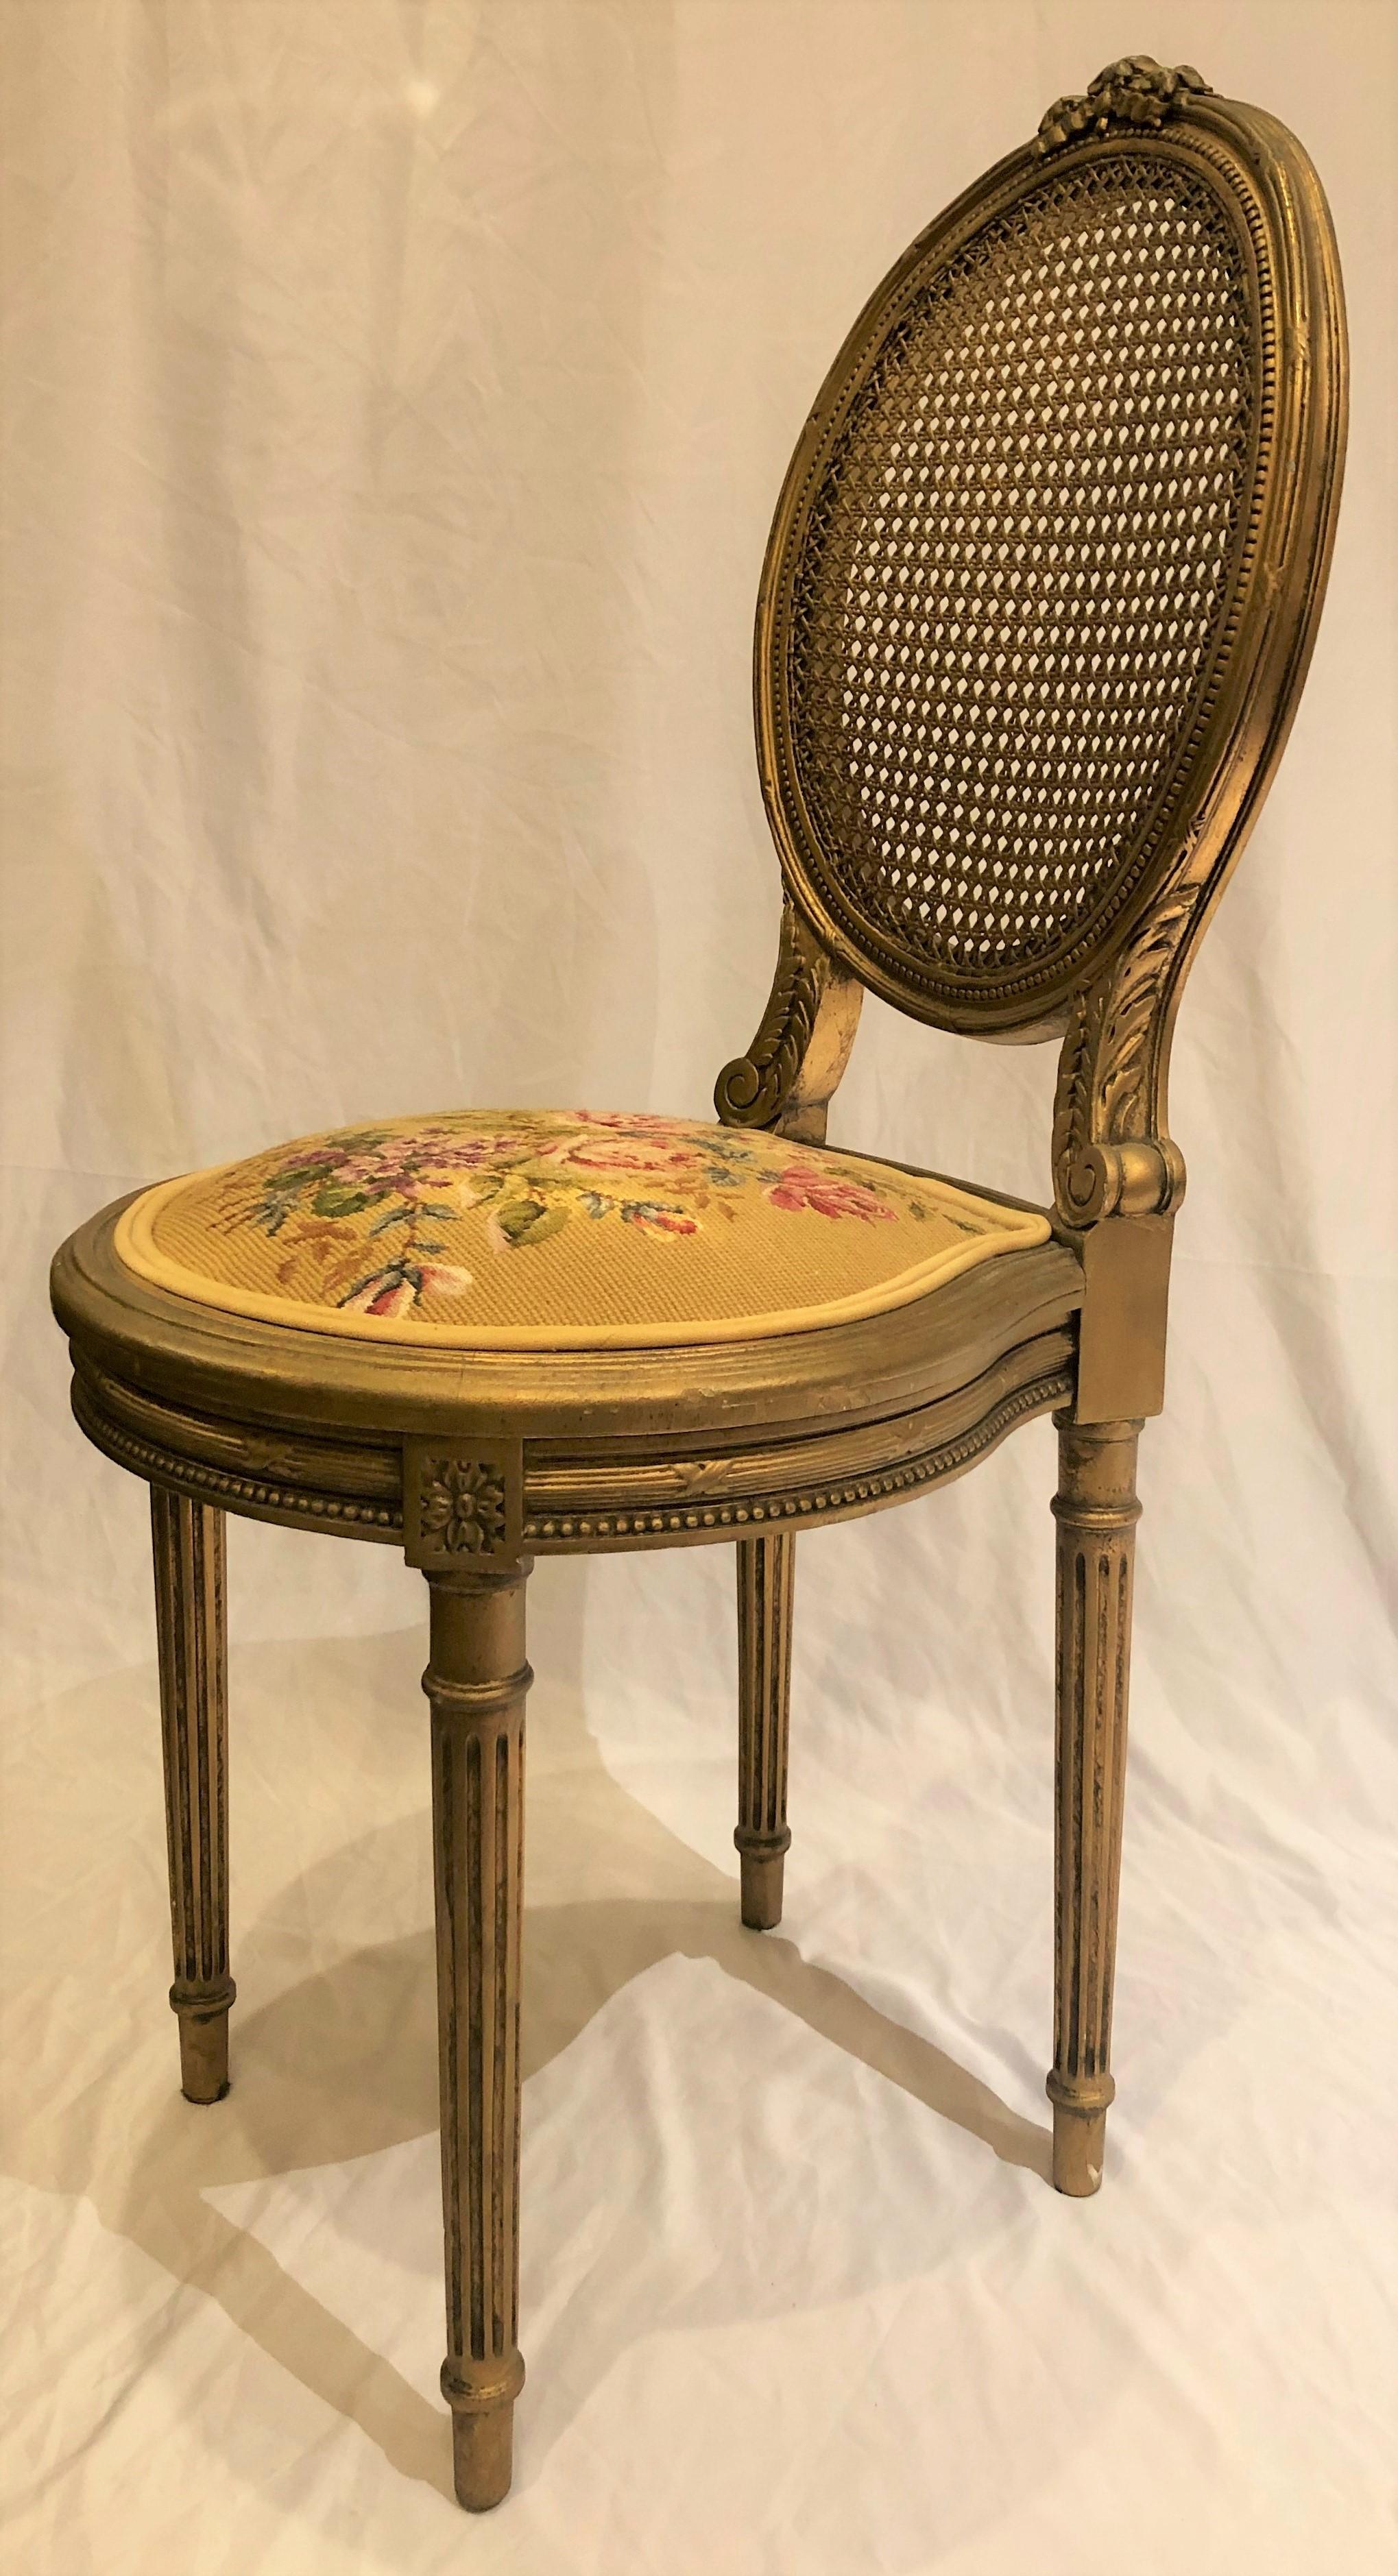 Antique French Carved Wood Gilt Side Chair, circa 1870-1880 In Good Condition For Sale In New Orleans, LA